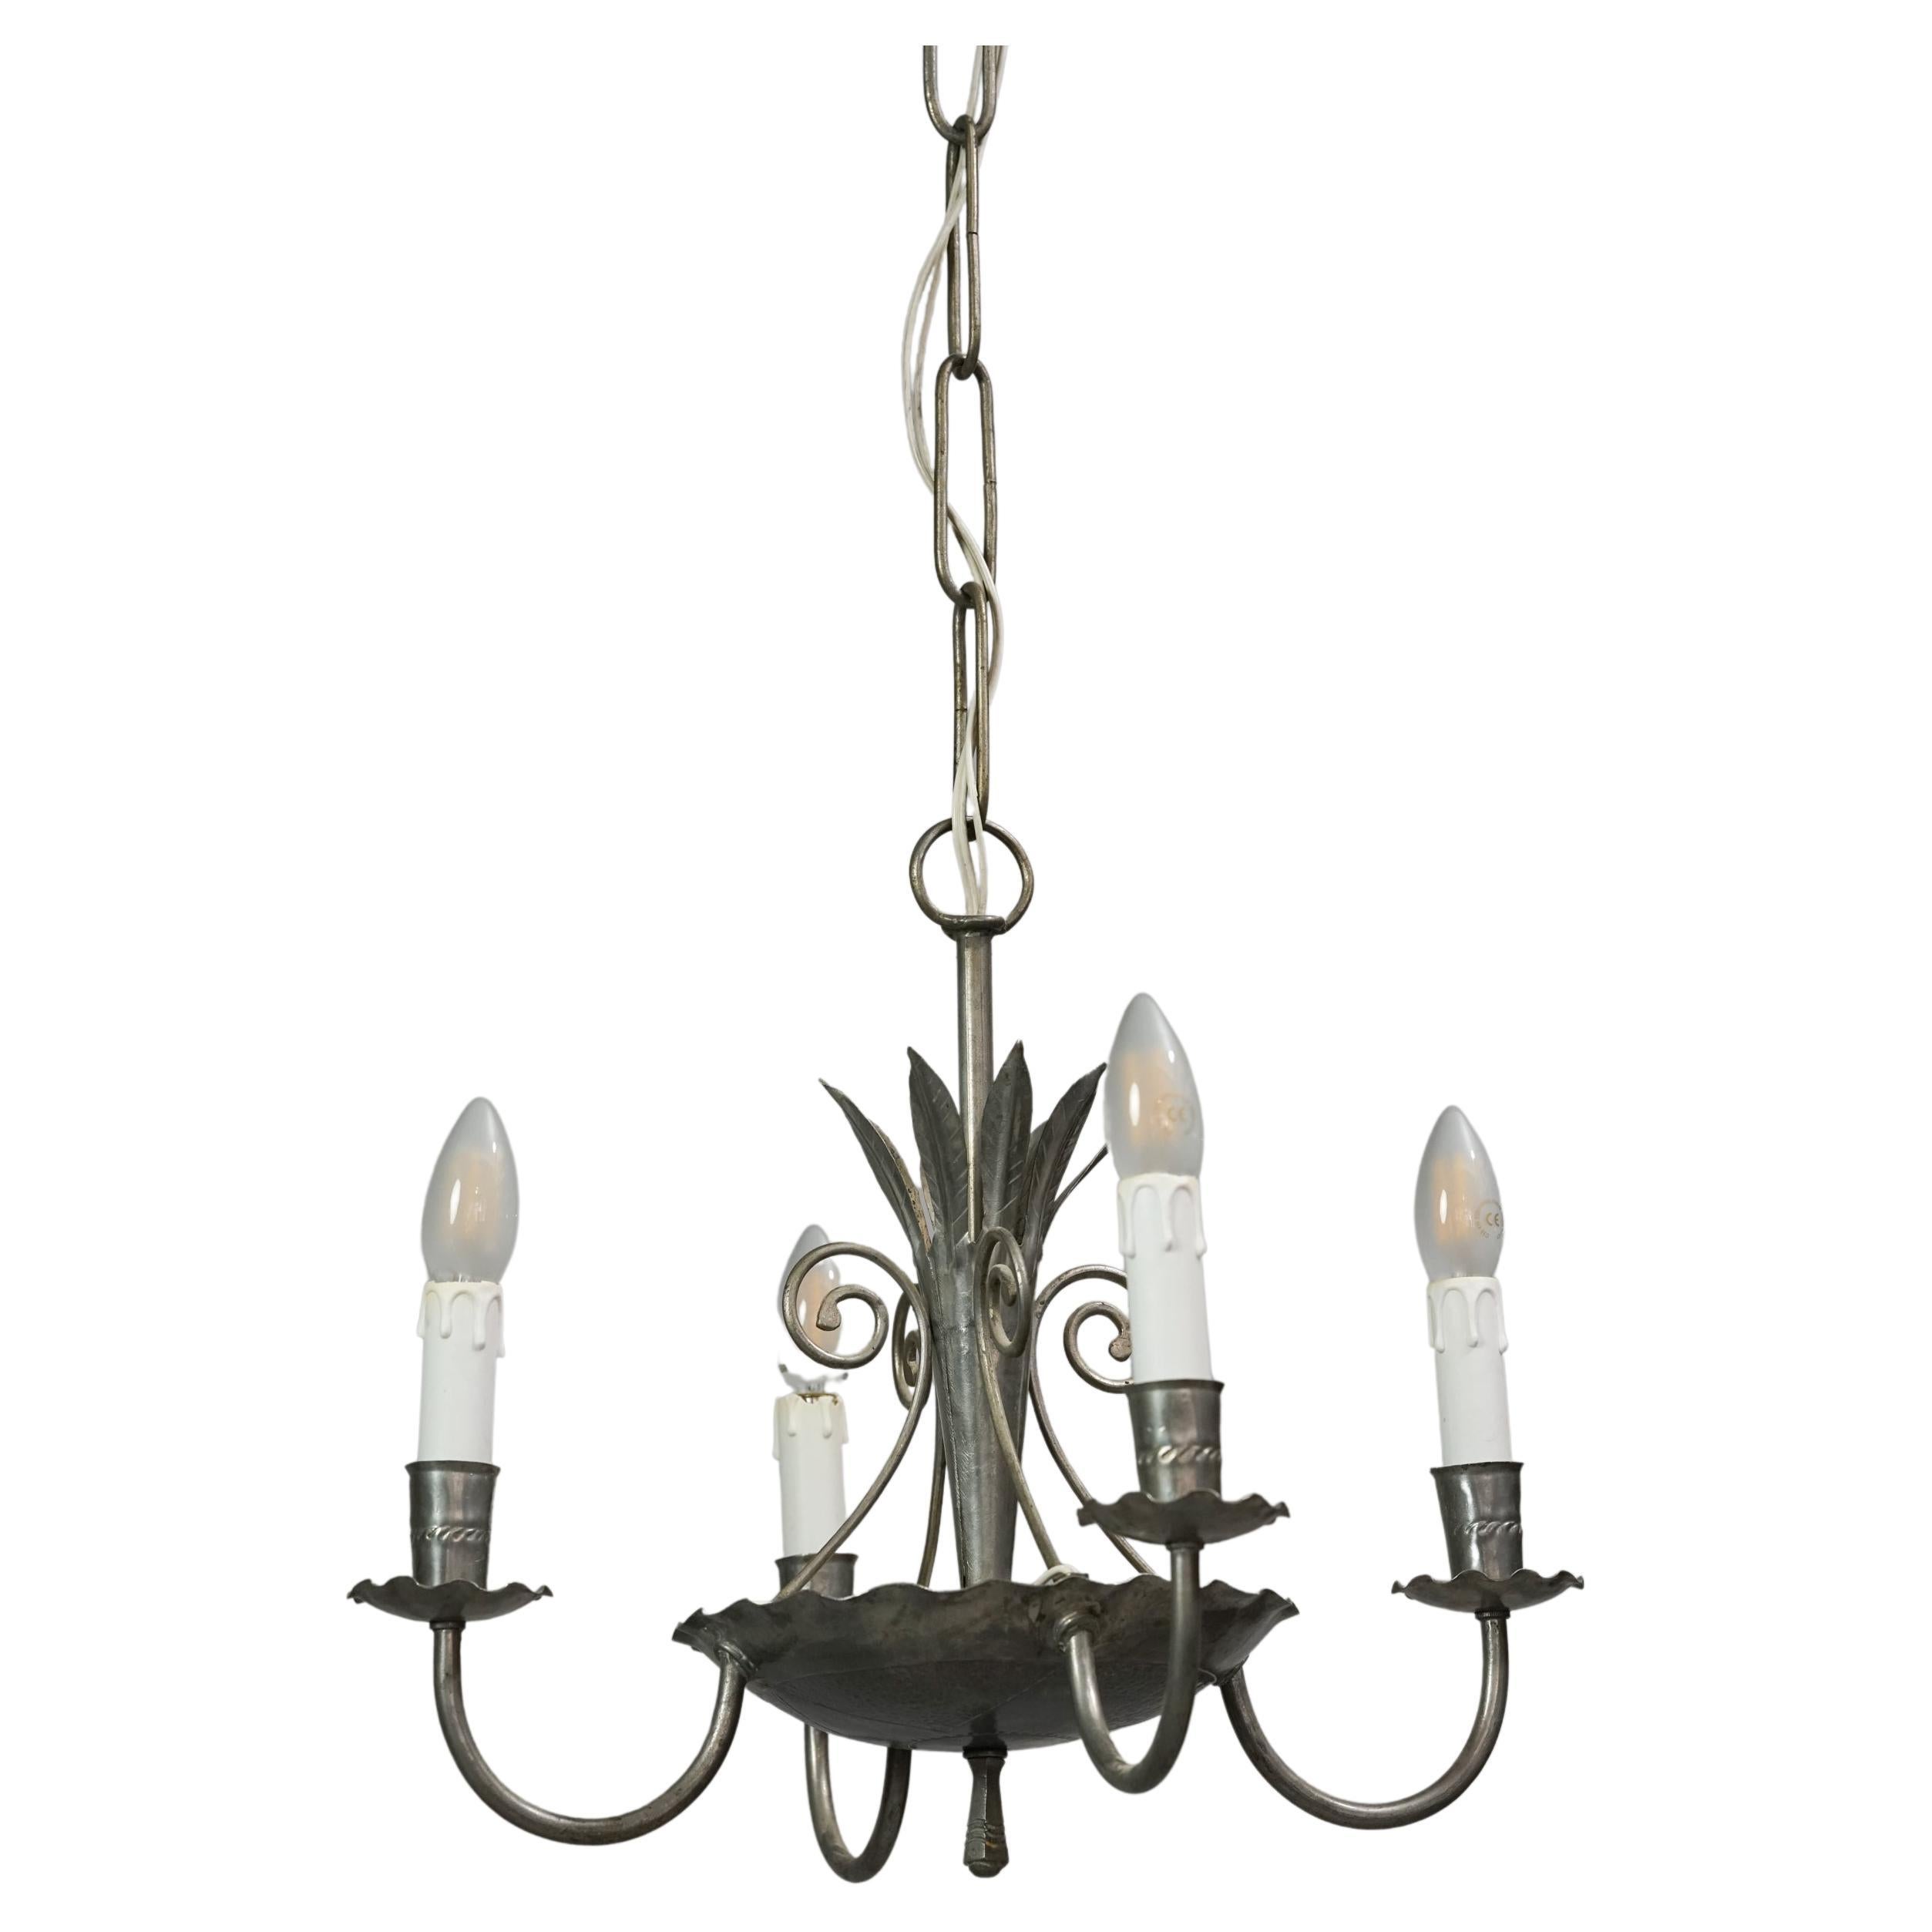 Rare Finnish Iron Chandelier Attributed to Paavo Tynell, 1920s For Sale